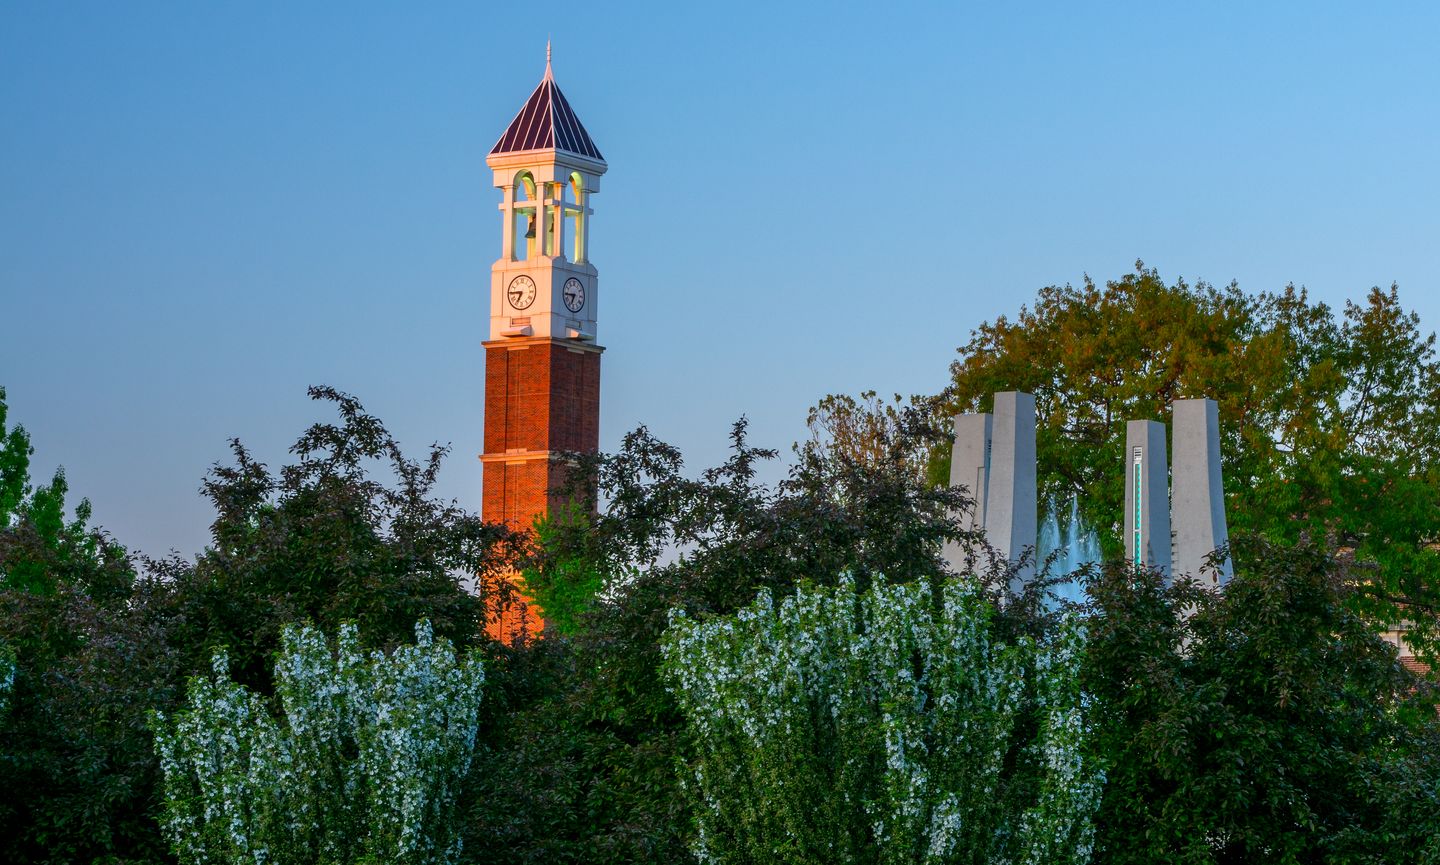 The Purdue University campus fountain and clocktower.